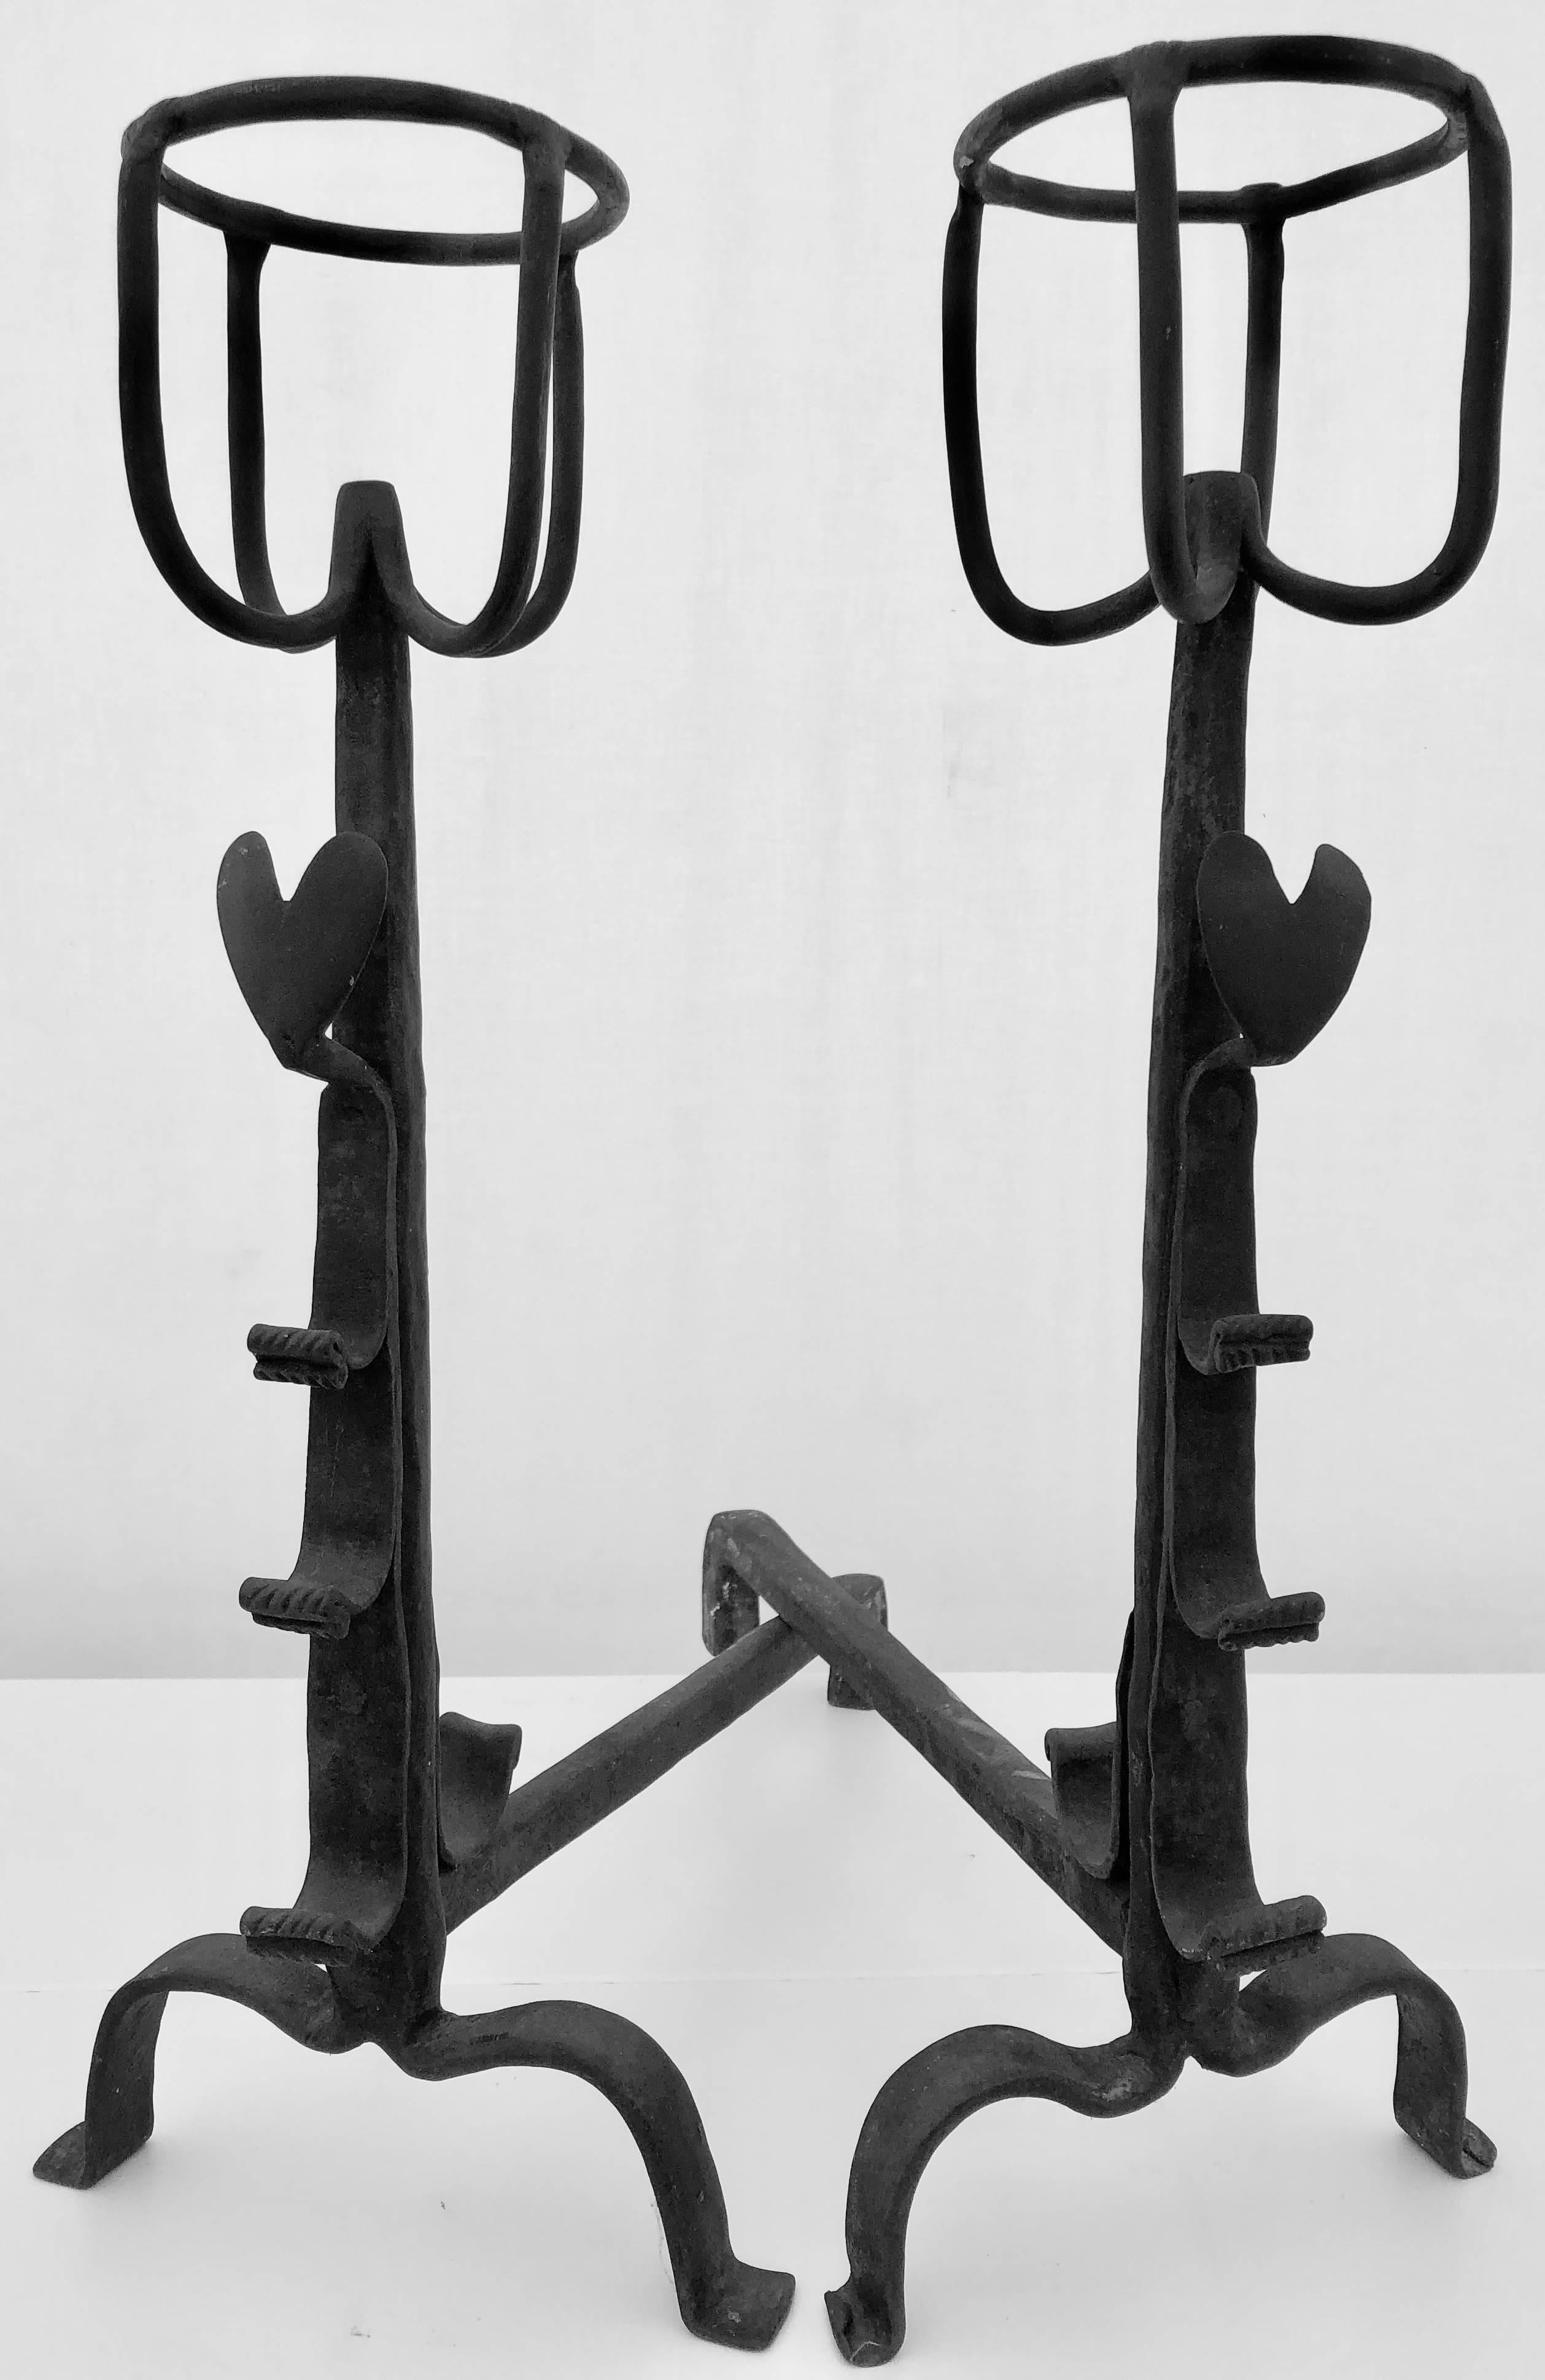 This is a beautiful pair of French early 18th century andirons hand made by a blacksmith in solid forged iron and enhanced by two hearts in the front and topped with two original receptacles, used to keep food or liquids warm in a fire. There are